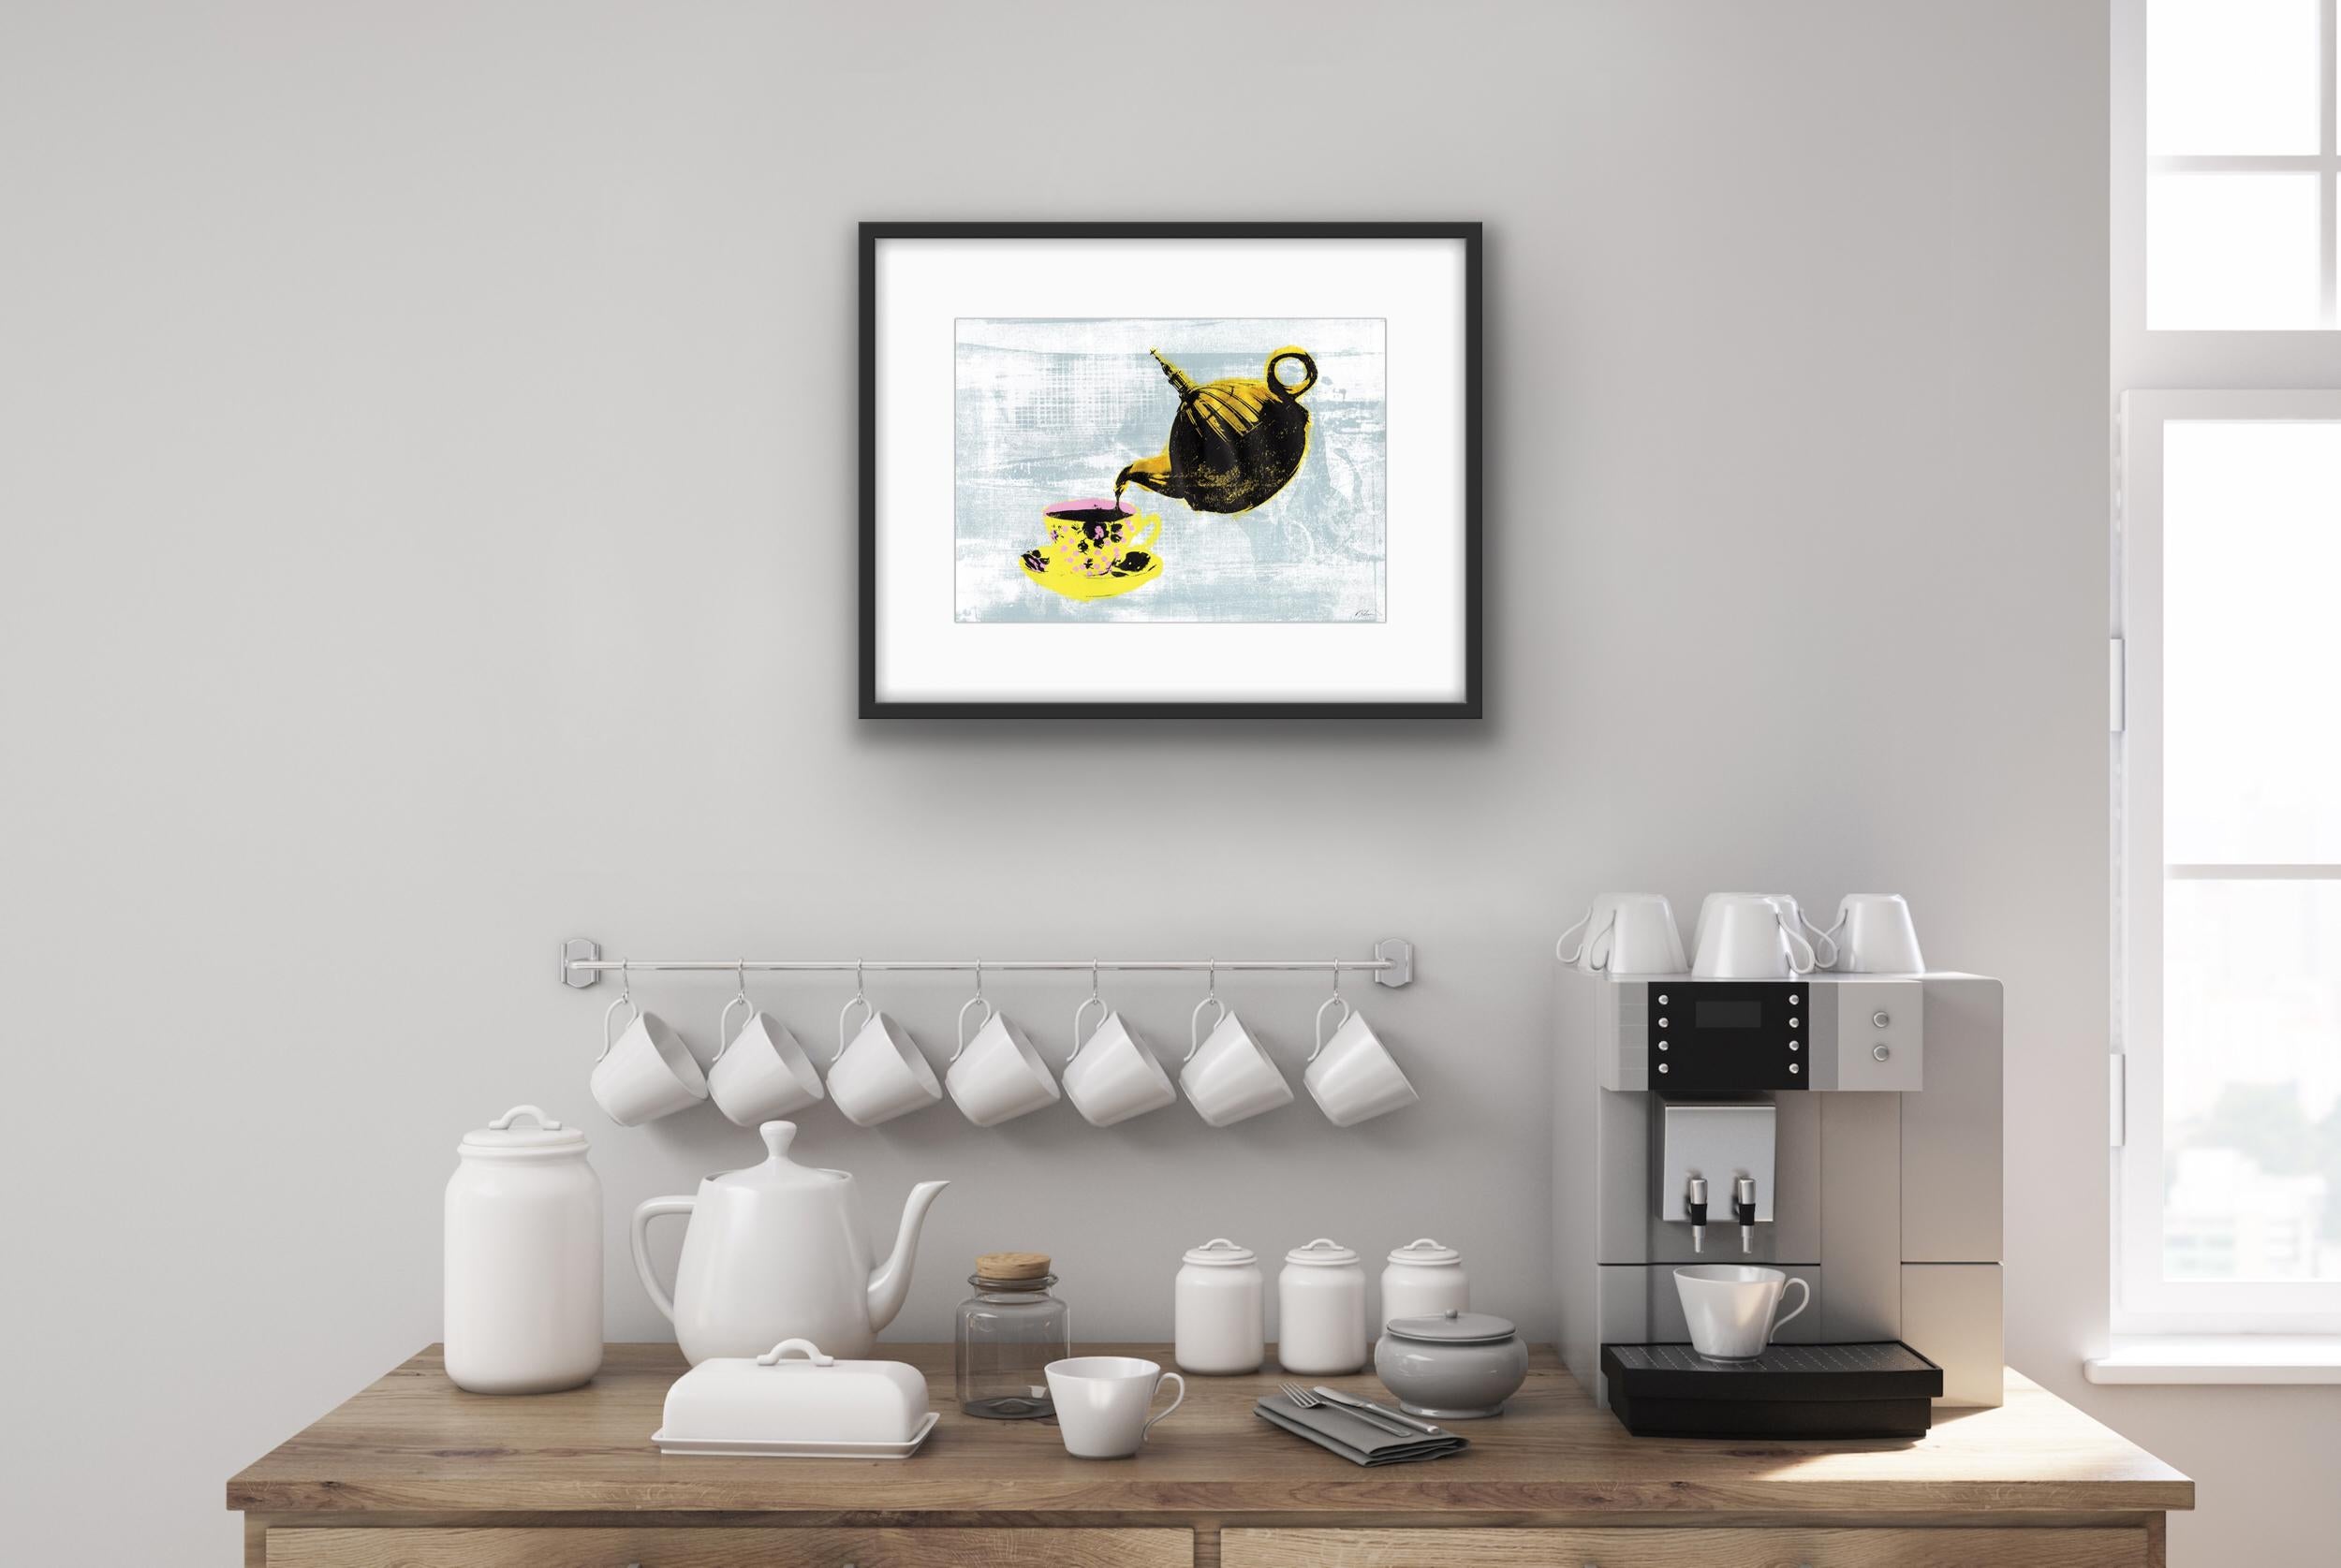 St Pauls, Pop Art Style Prints, Colourful Interior Artwork, London Architecture - Gray Still-Life Print by Katie Edwards